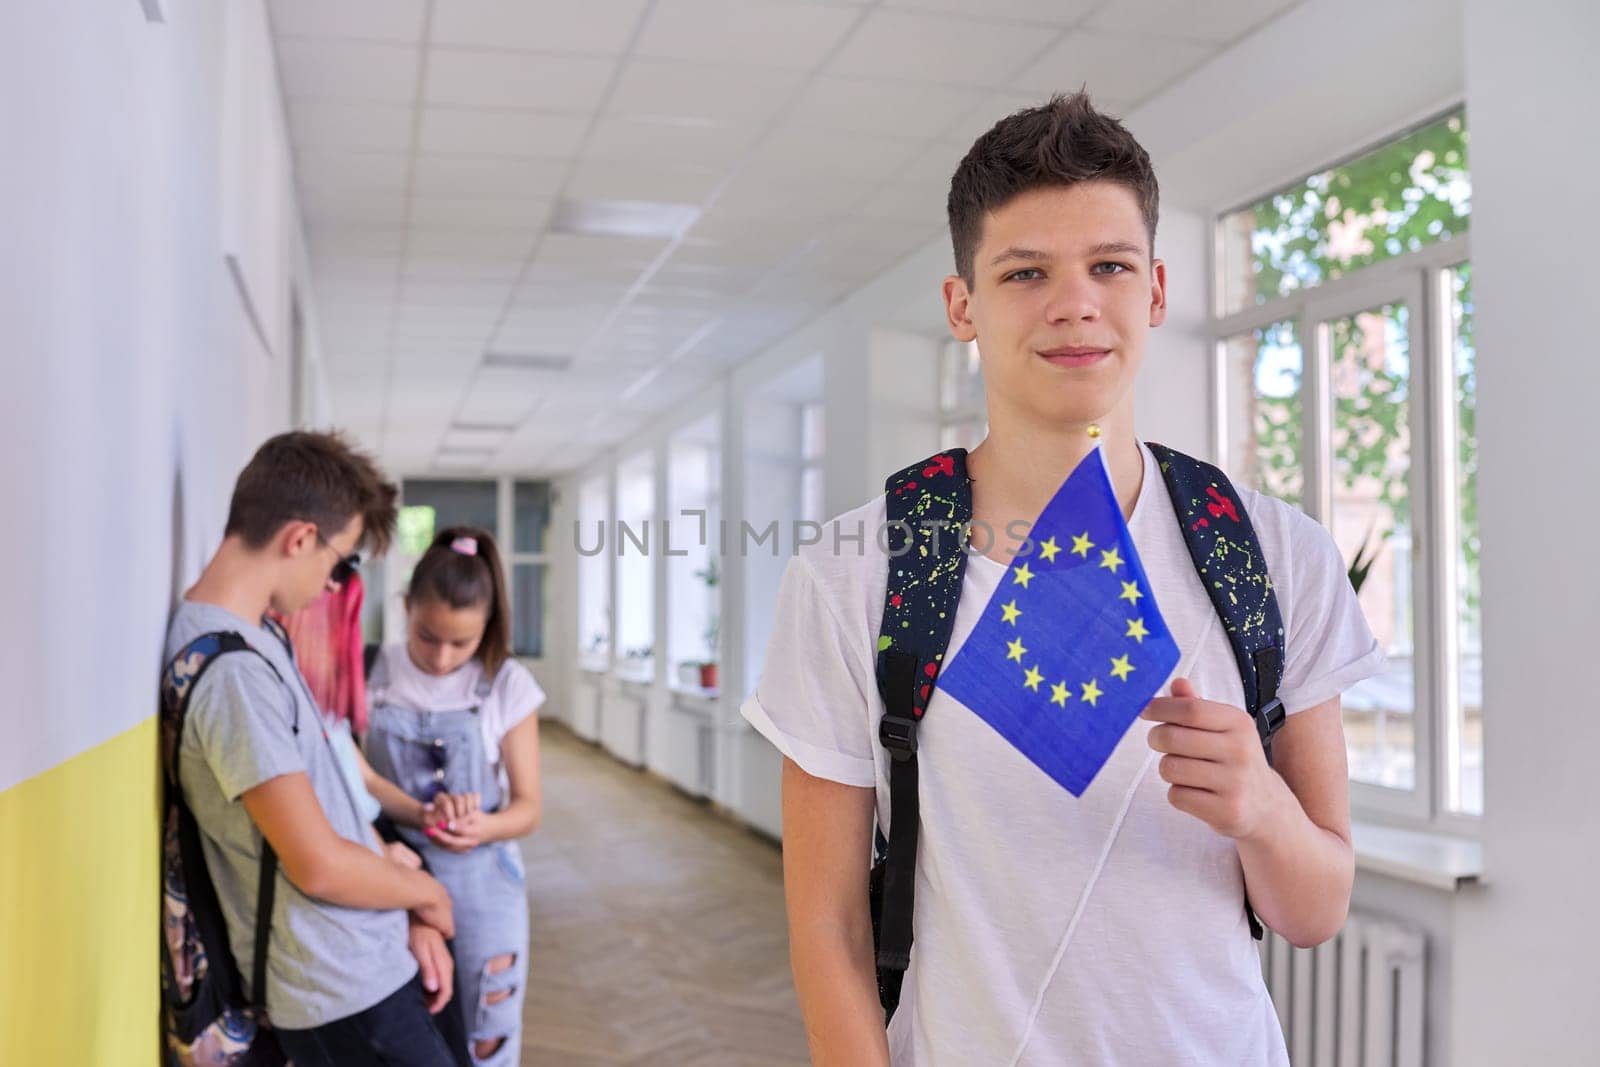 Male student teenager with EU flag inside college, group of students background. European Union, education In Europe, young people concept